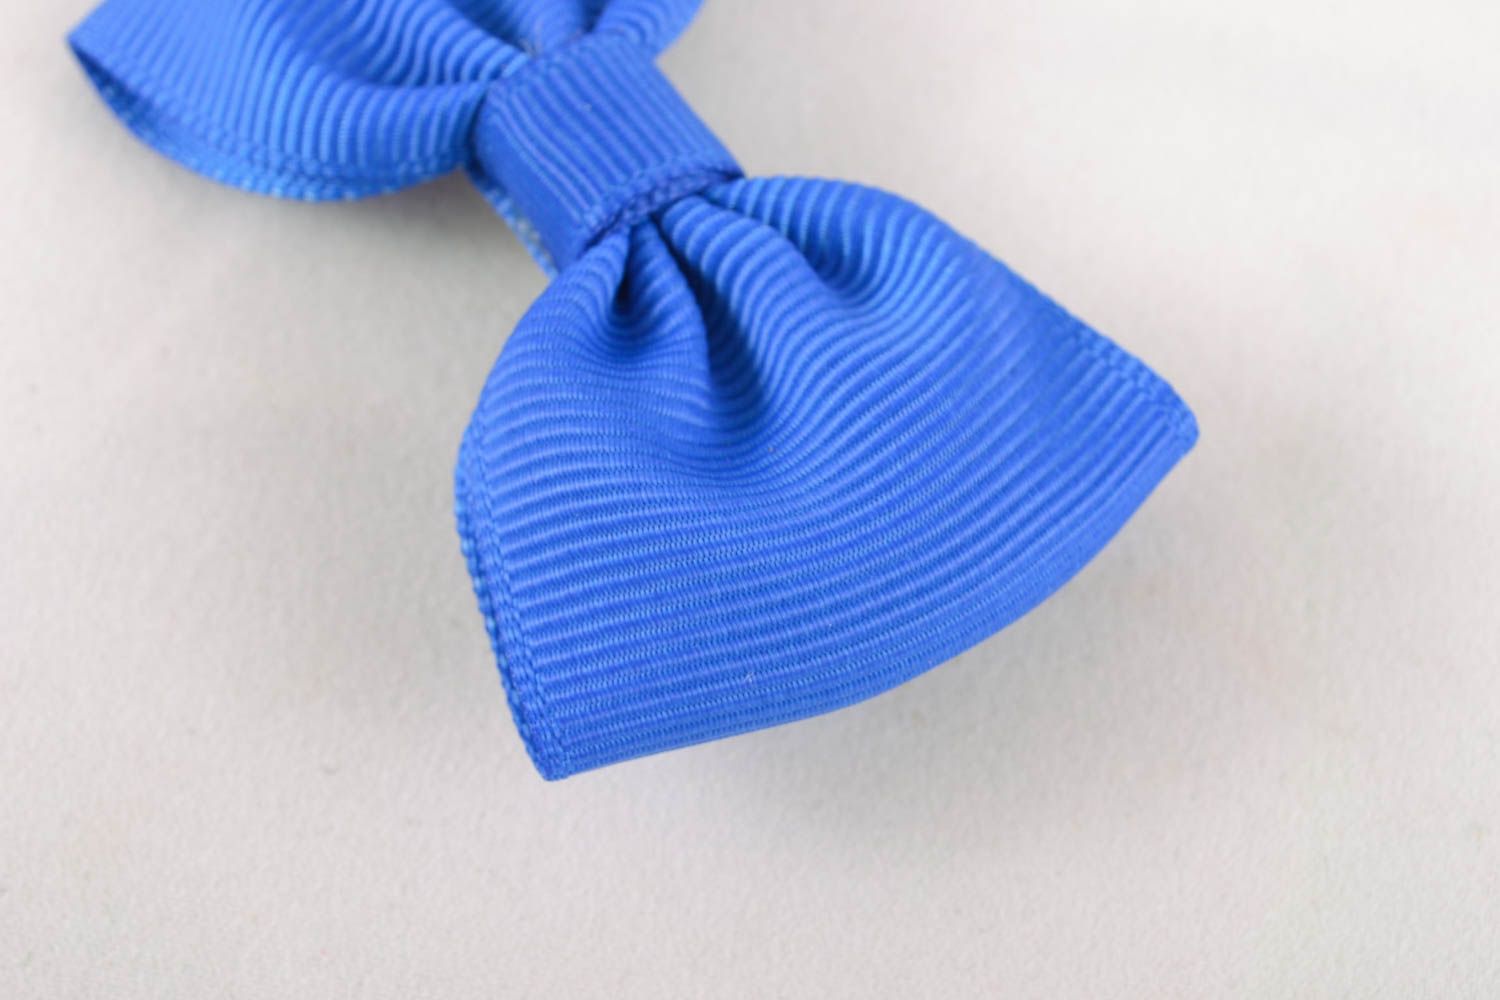 Interesting hair clips of blue color 2 items photo 5